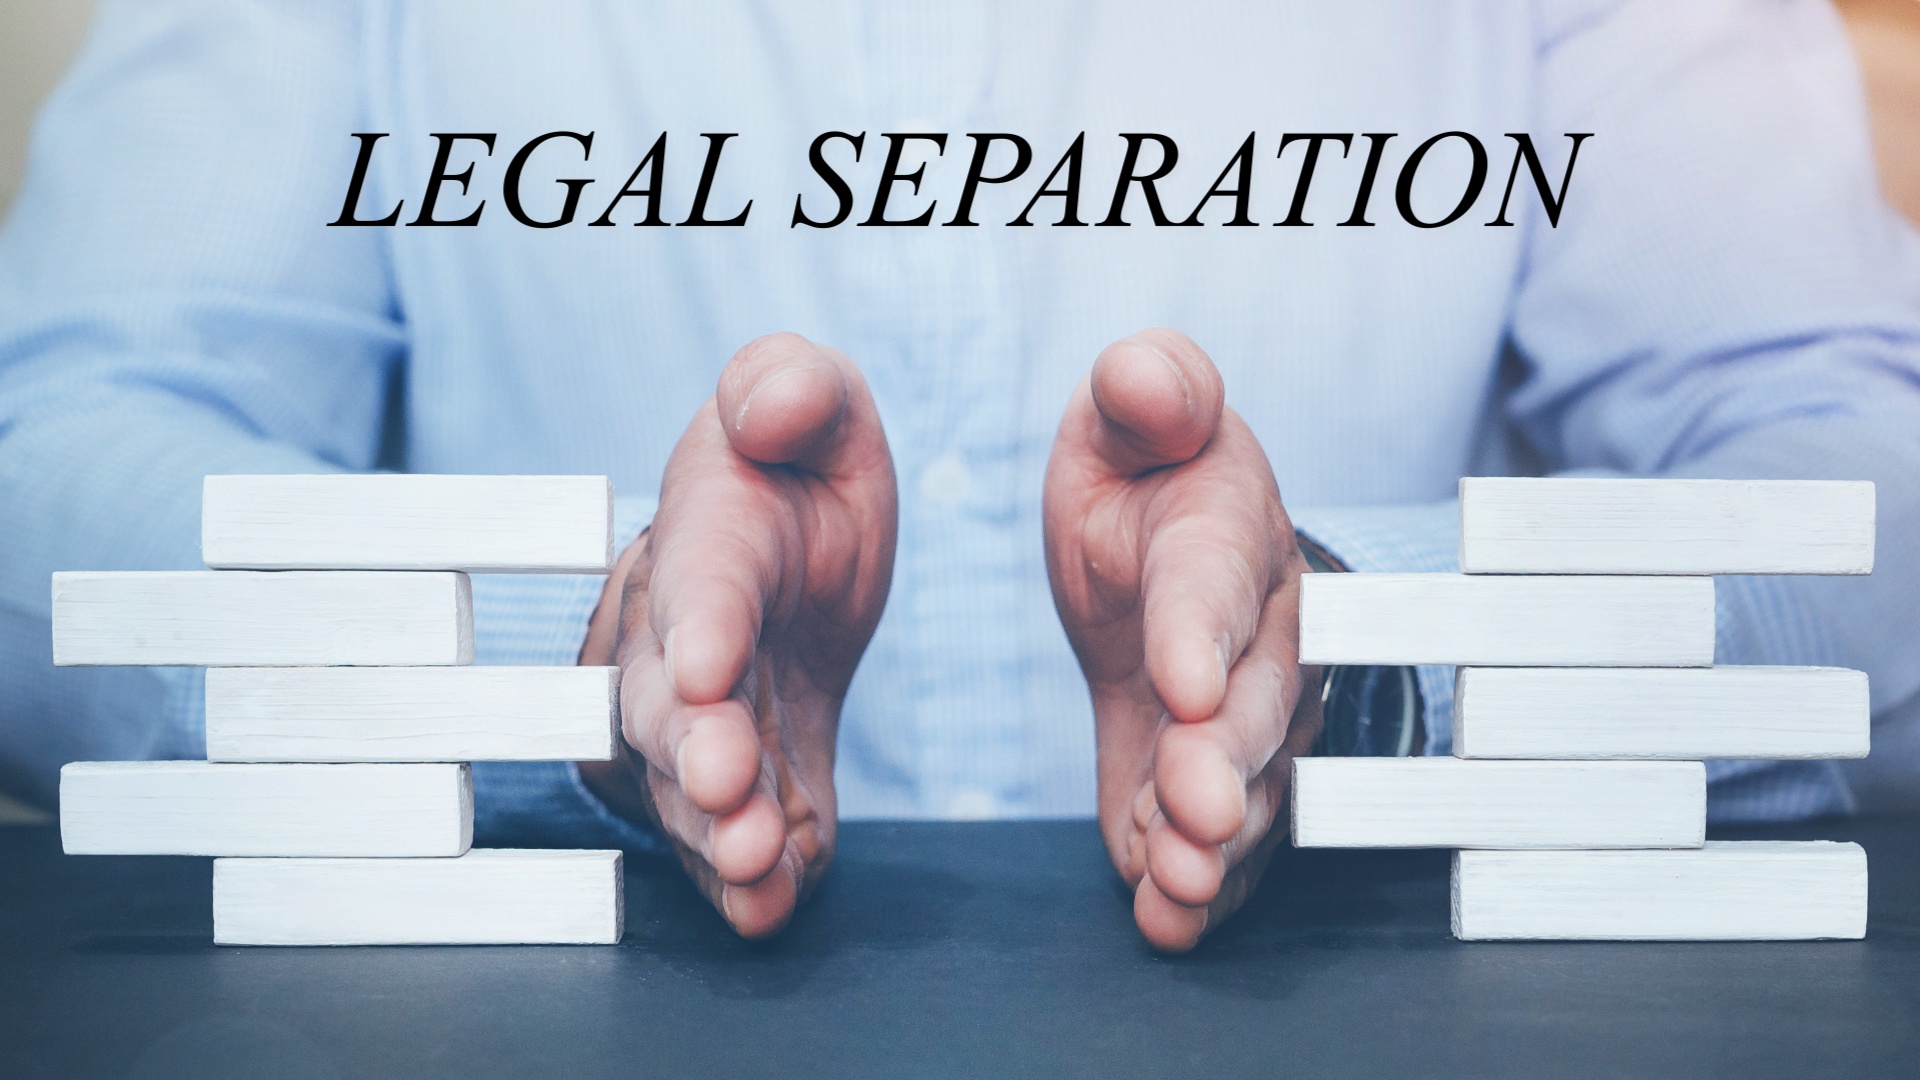 can you date while legally separated